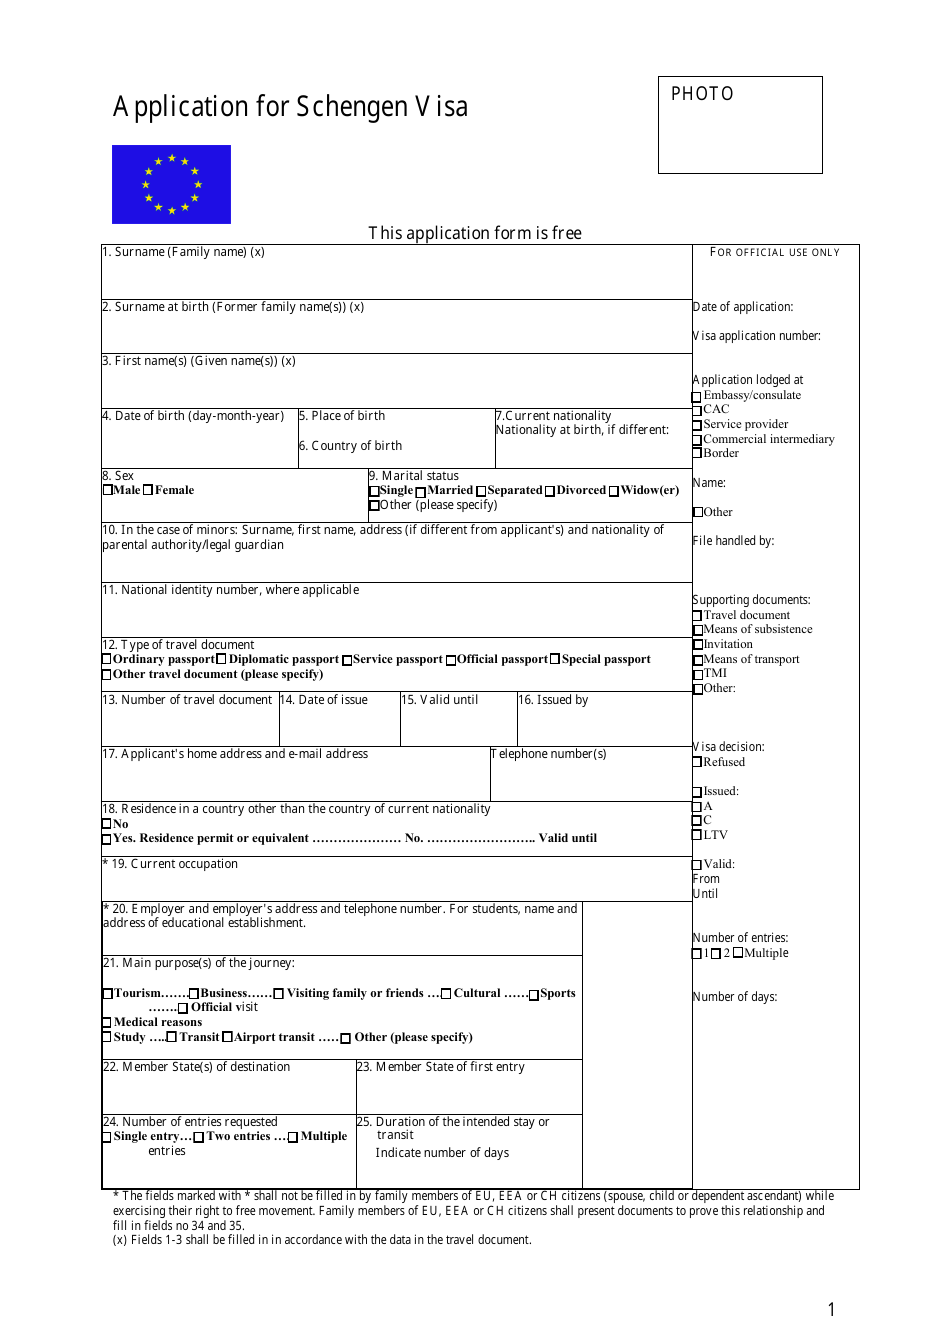 Application Form for Schengen Visa - Rome, Italy, Page 1